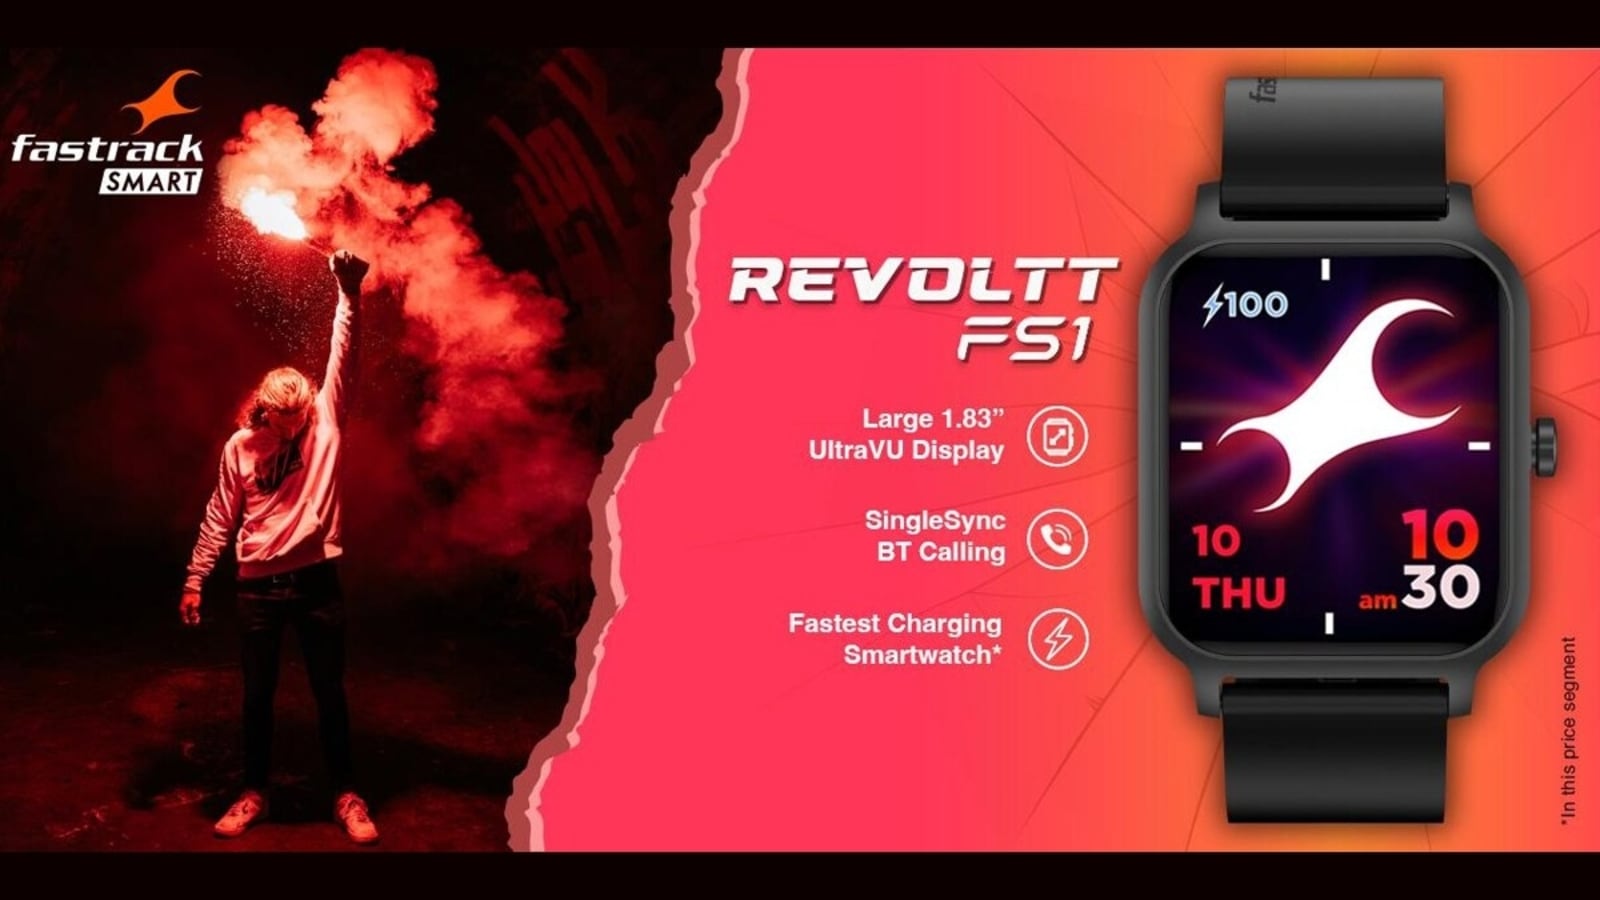 Fastrack launches Revoltt FS1 with SingleSync BT calling and fast charging Tech News